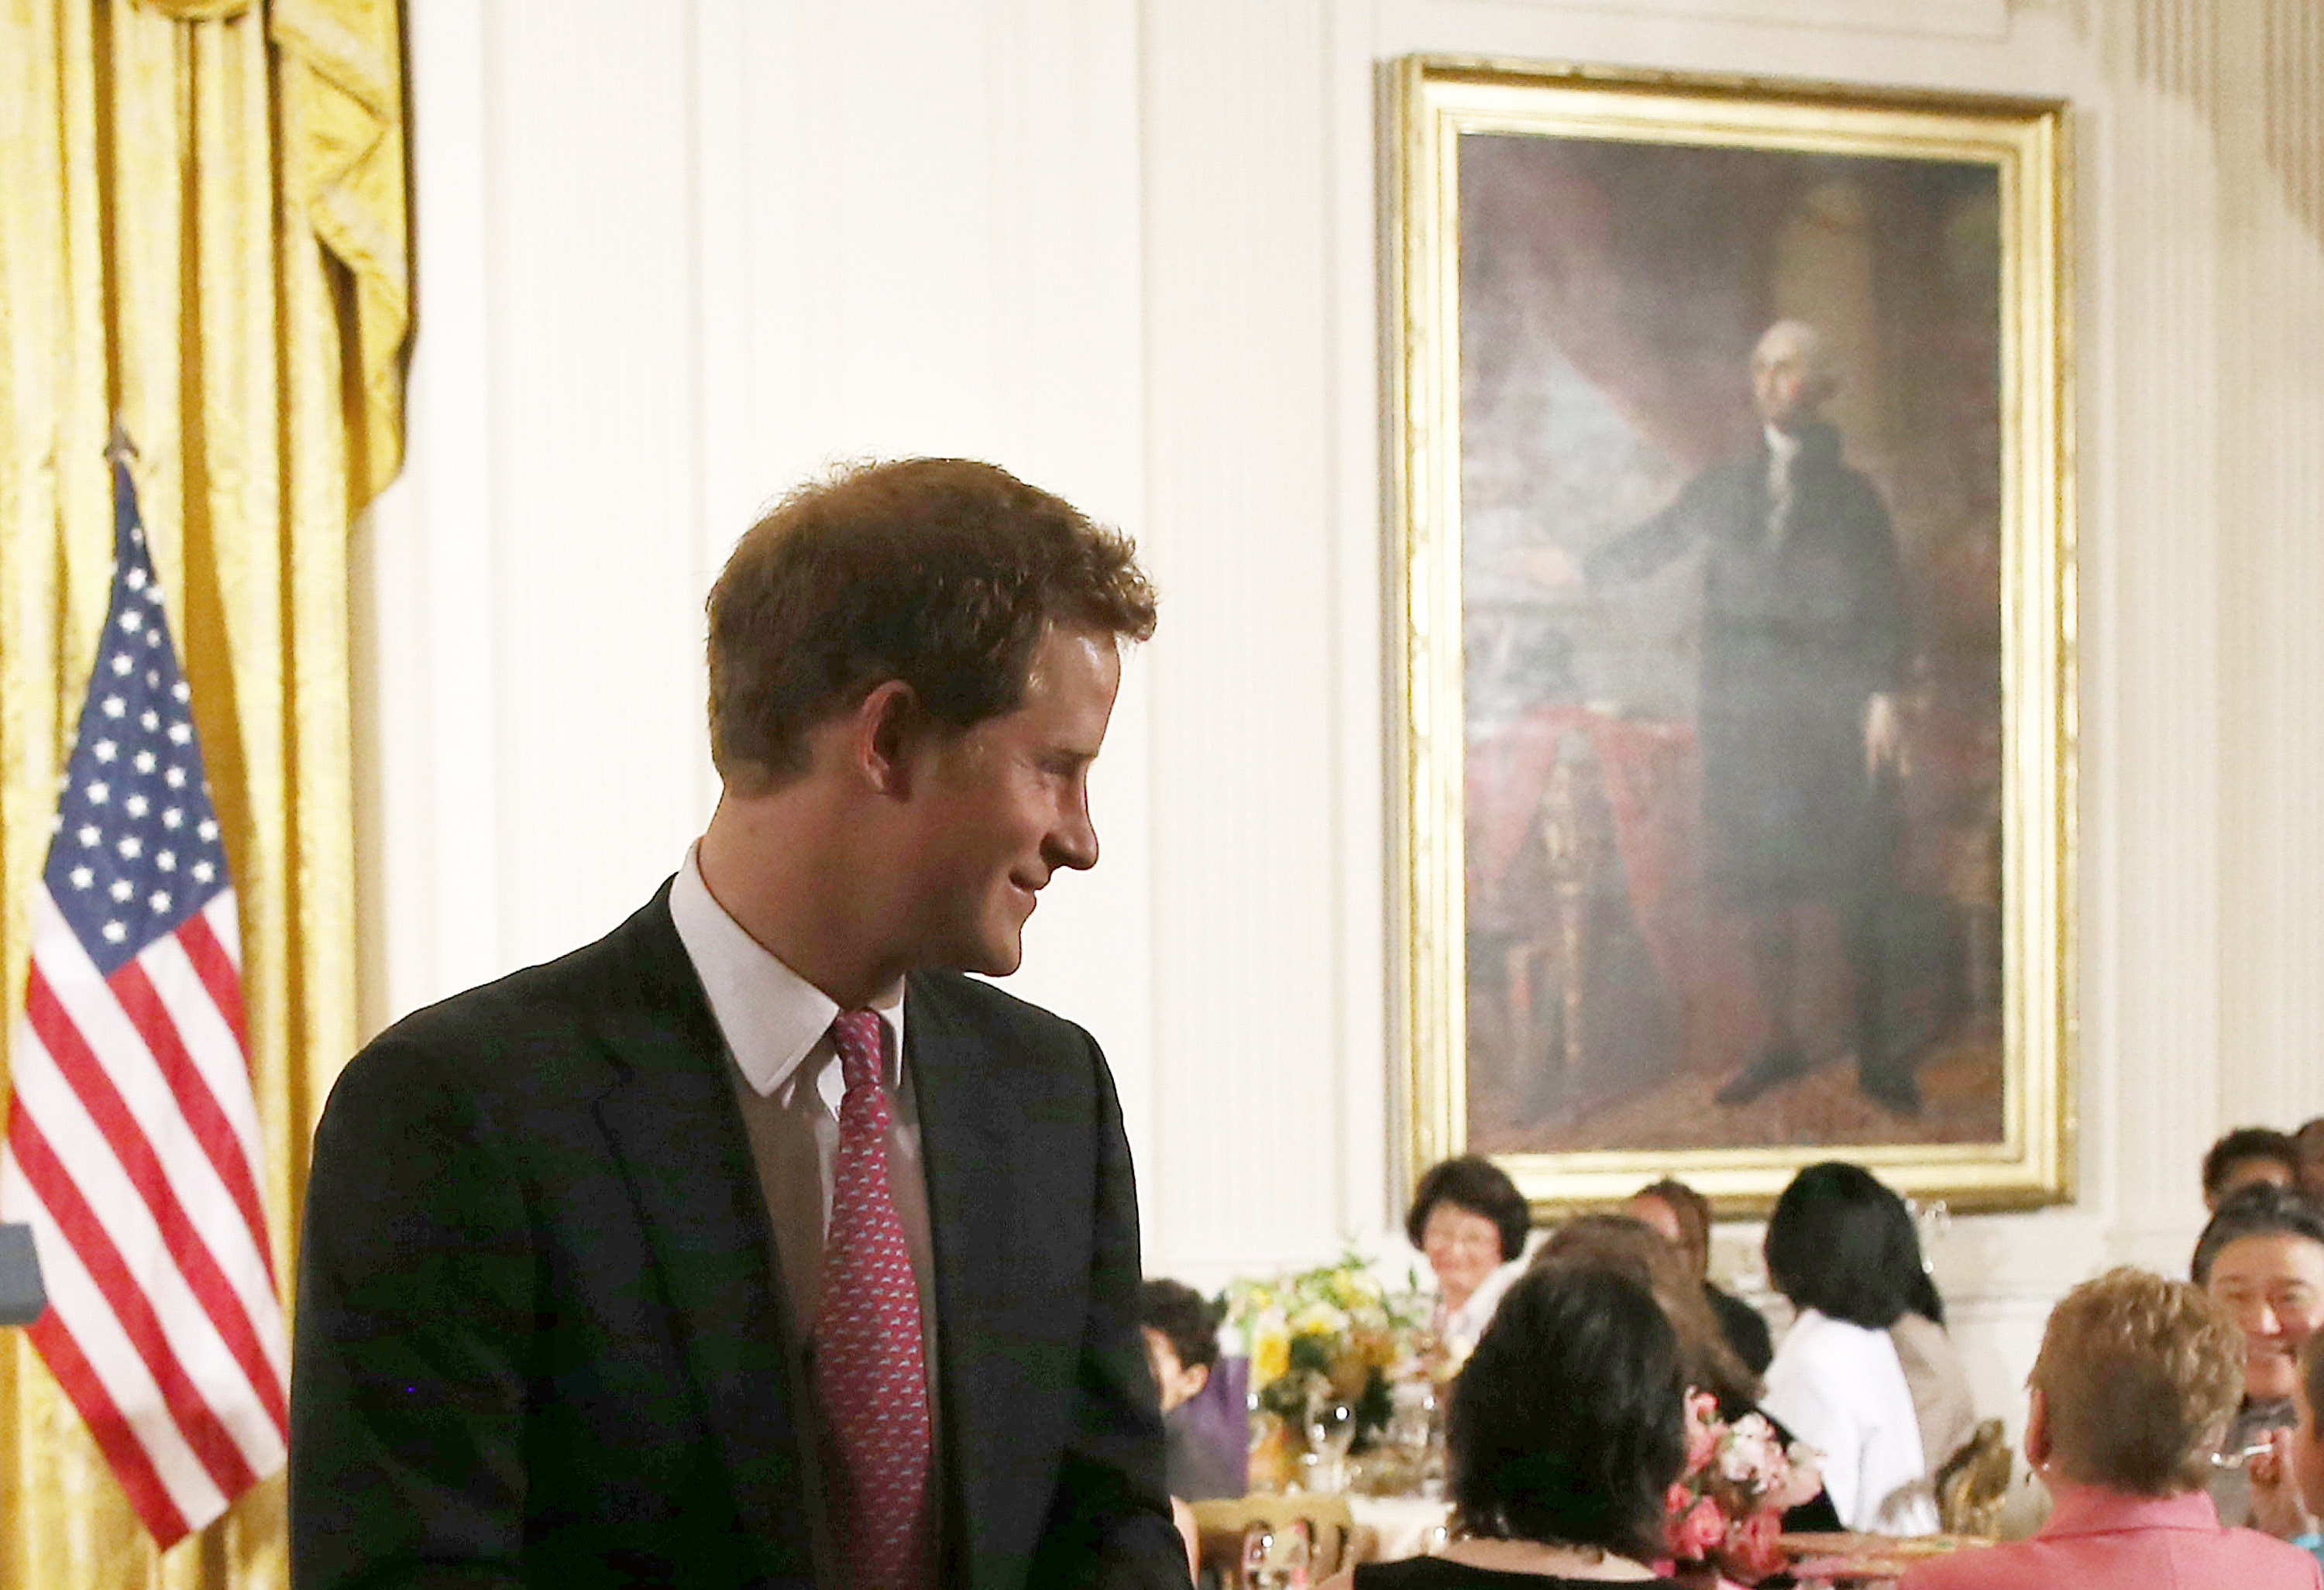 Prince Harry at an event hosted by former First Lady of the United States Michelle Obama to honor military families at the White House in Washington, DC | Source: Getty Images